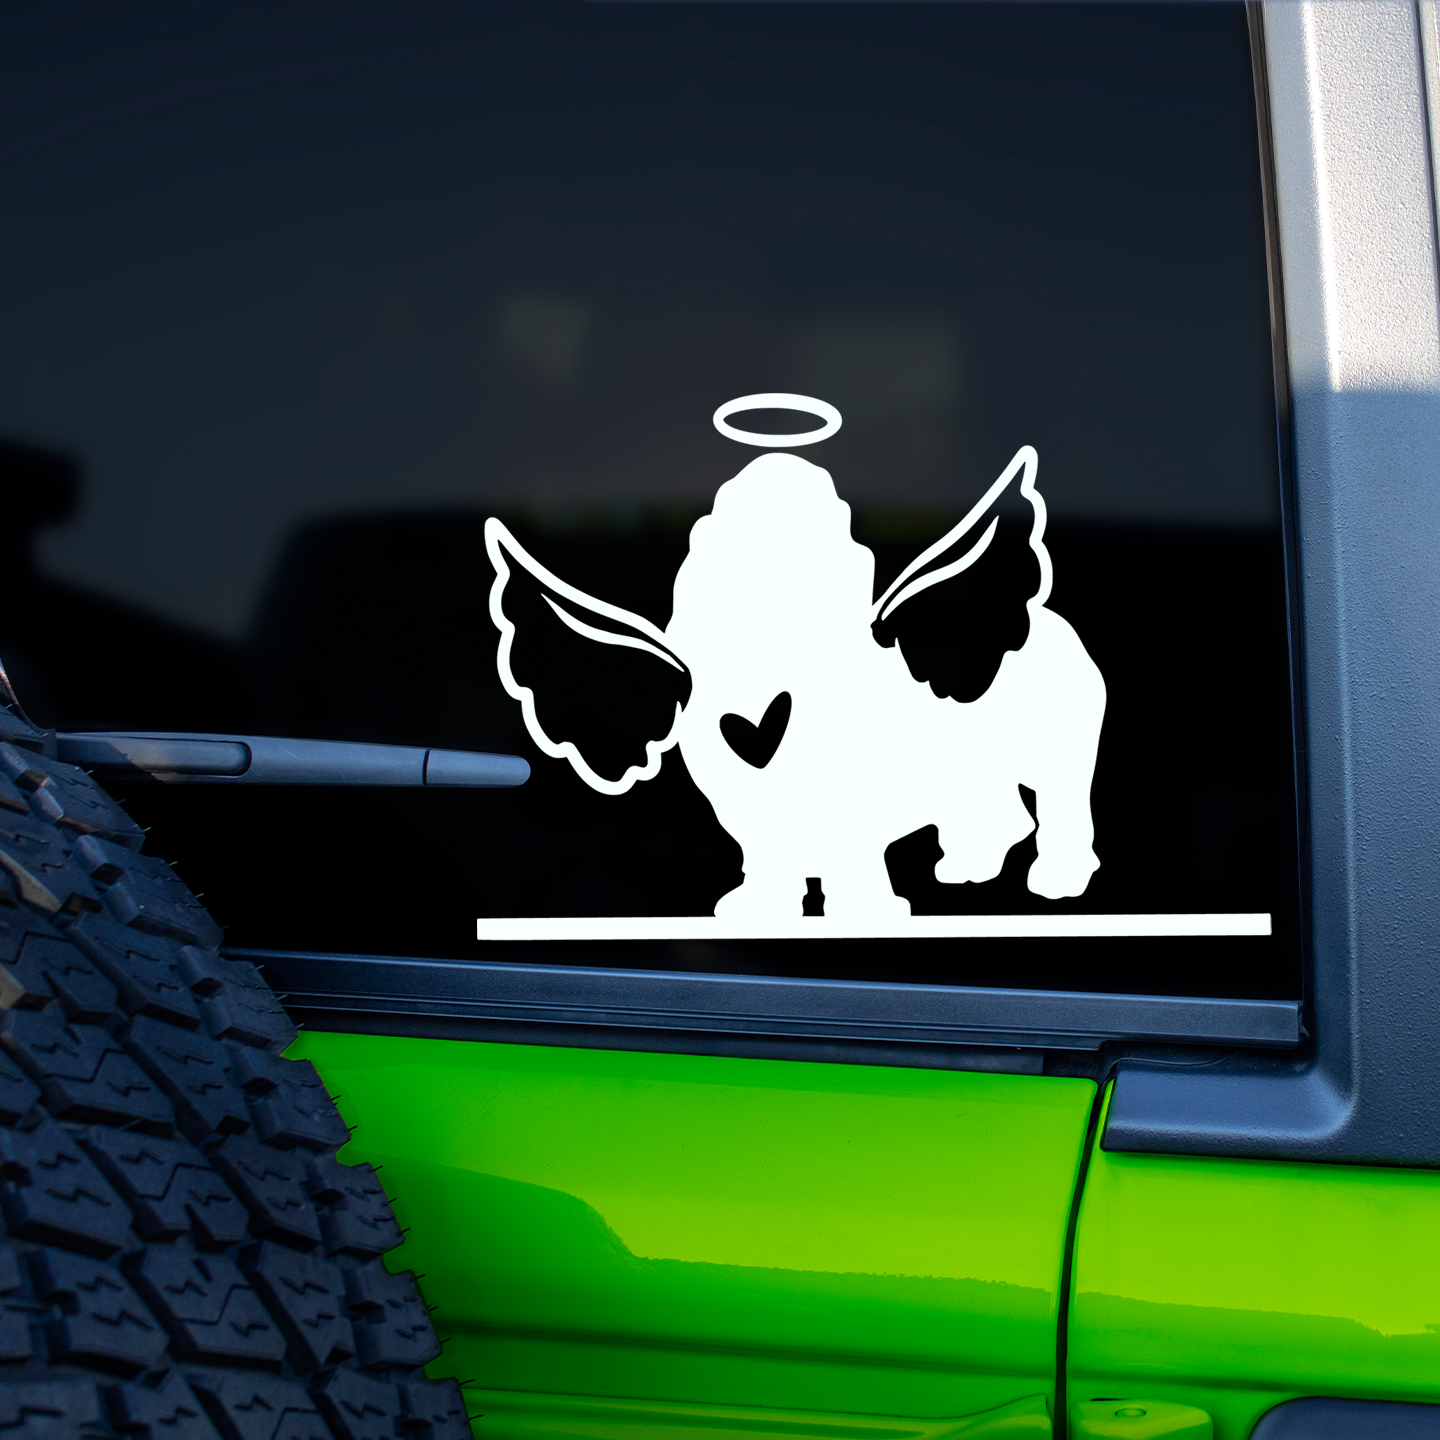 Basset Hound With Wings Sticker